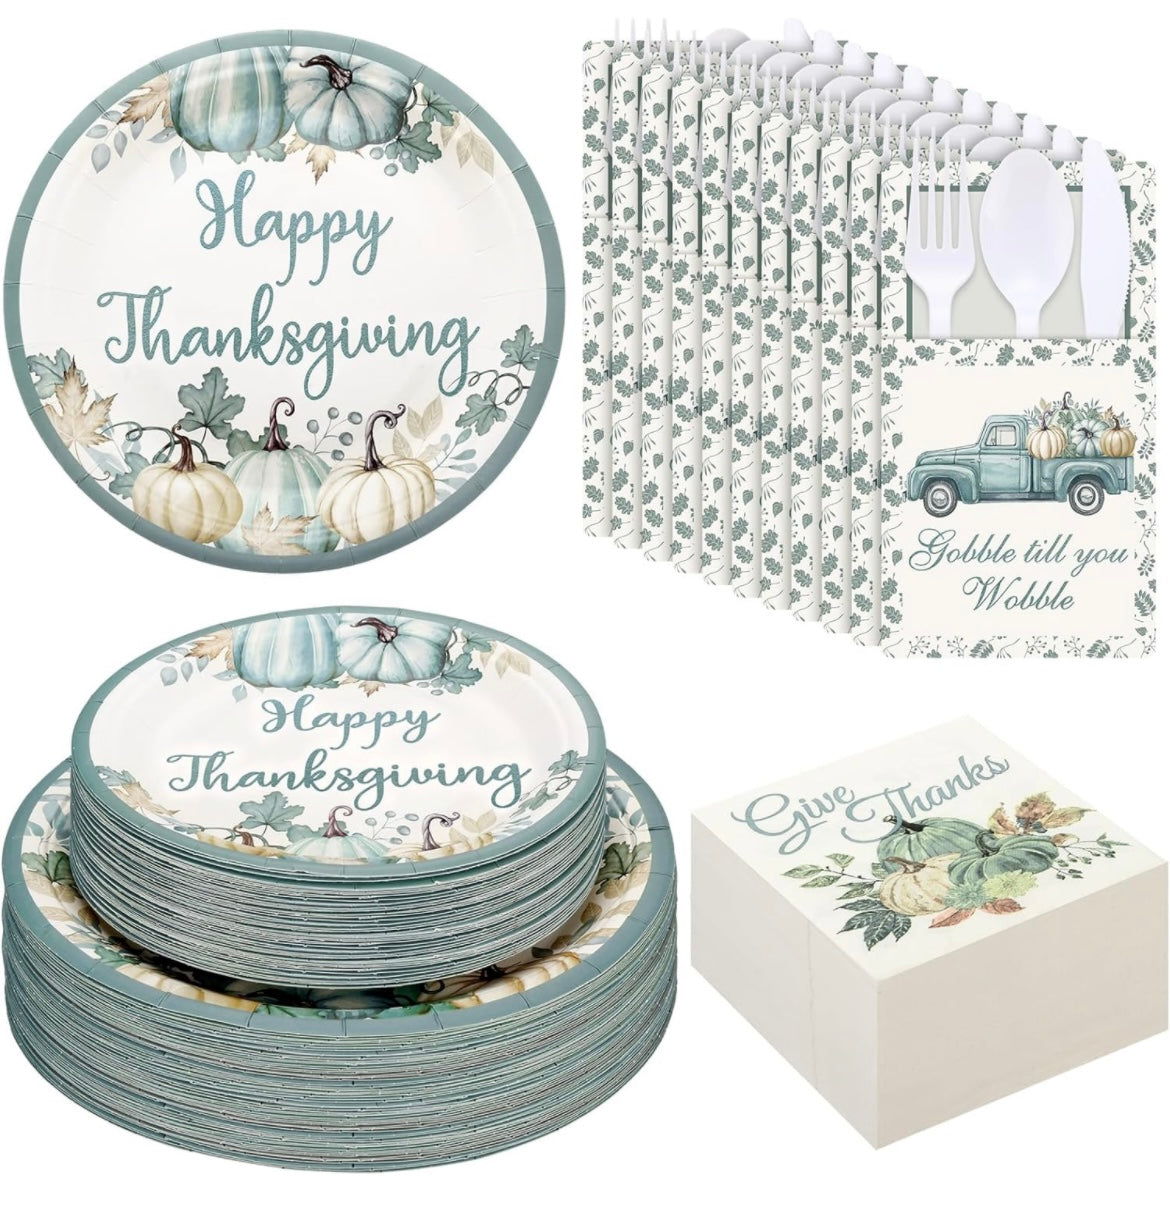 216pcs-Thanksgiving Plates Napkins Disposable Cutlery Holder Set Thanksgiving Centerpieces for Table Thanksgiving Decor for Dinner Turkey Autumn Leaves Fall Harvest Wedding Disposable Decor (Truck)